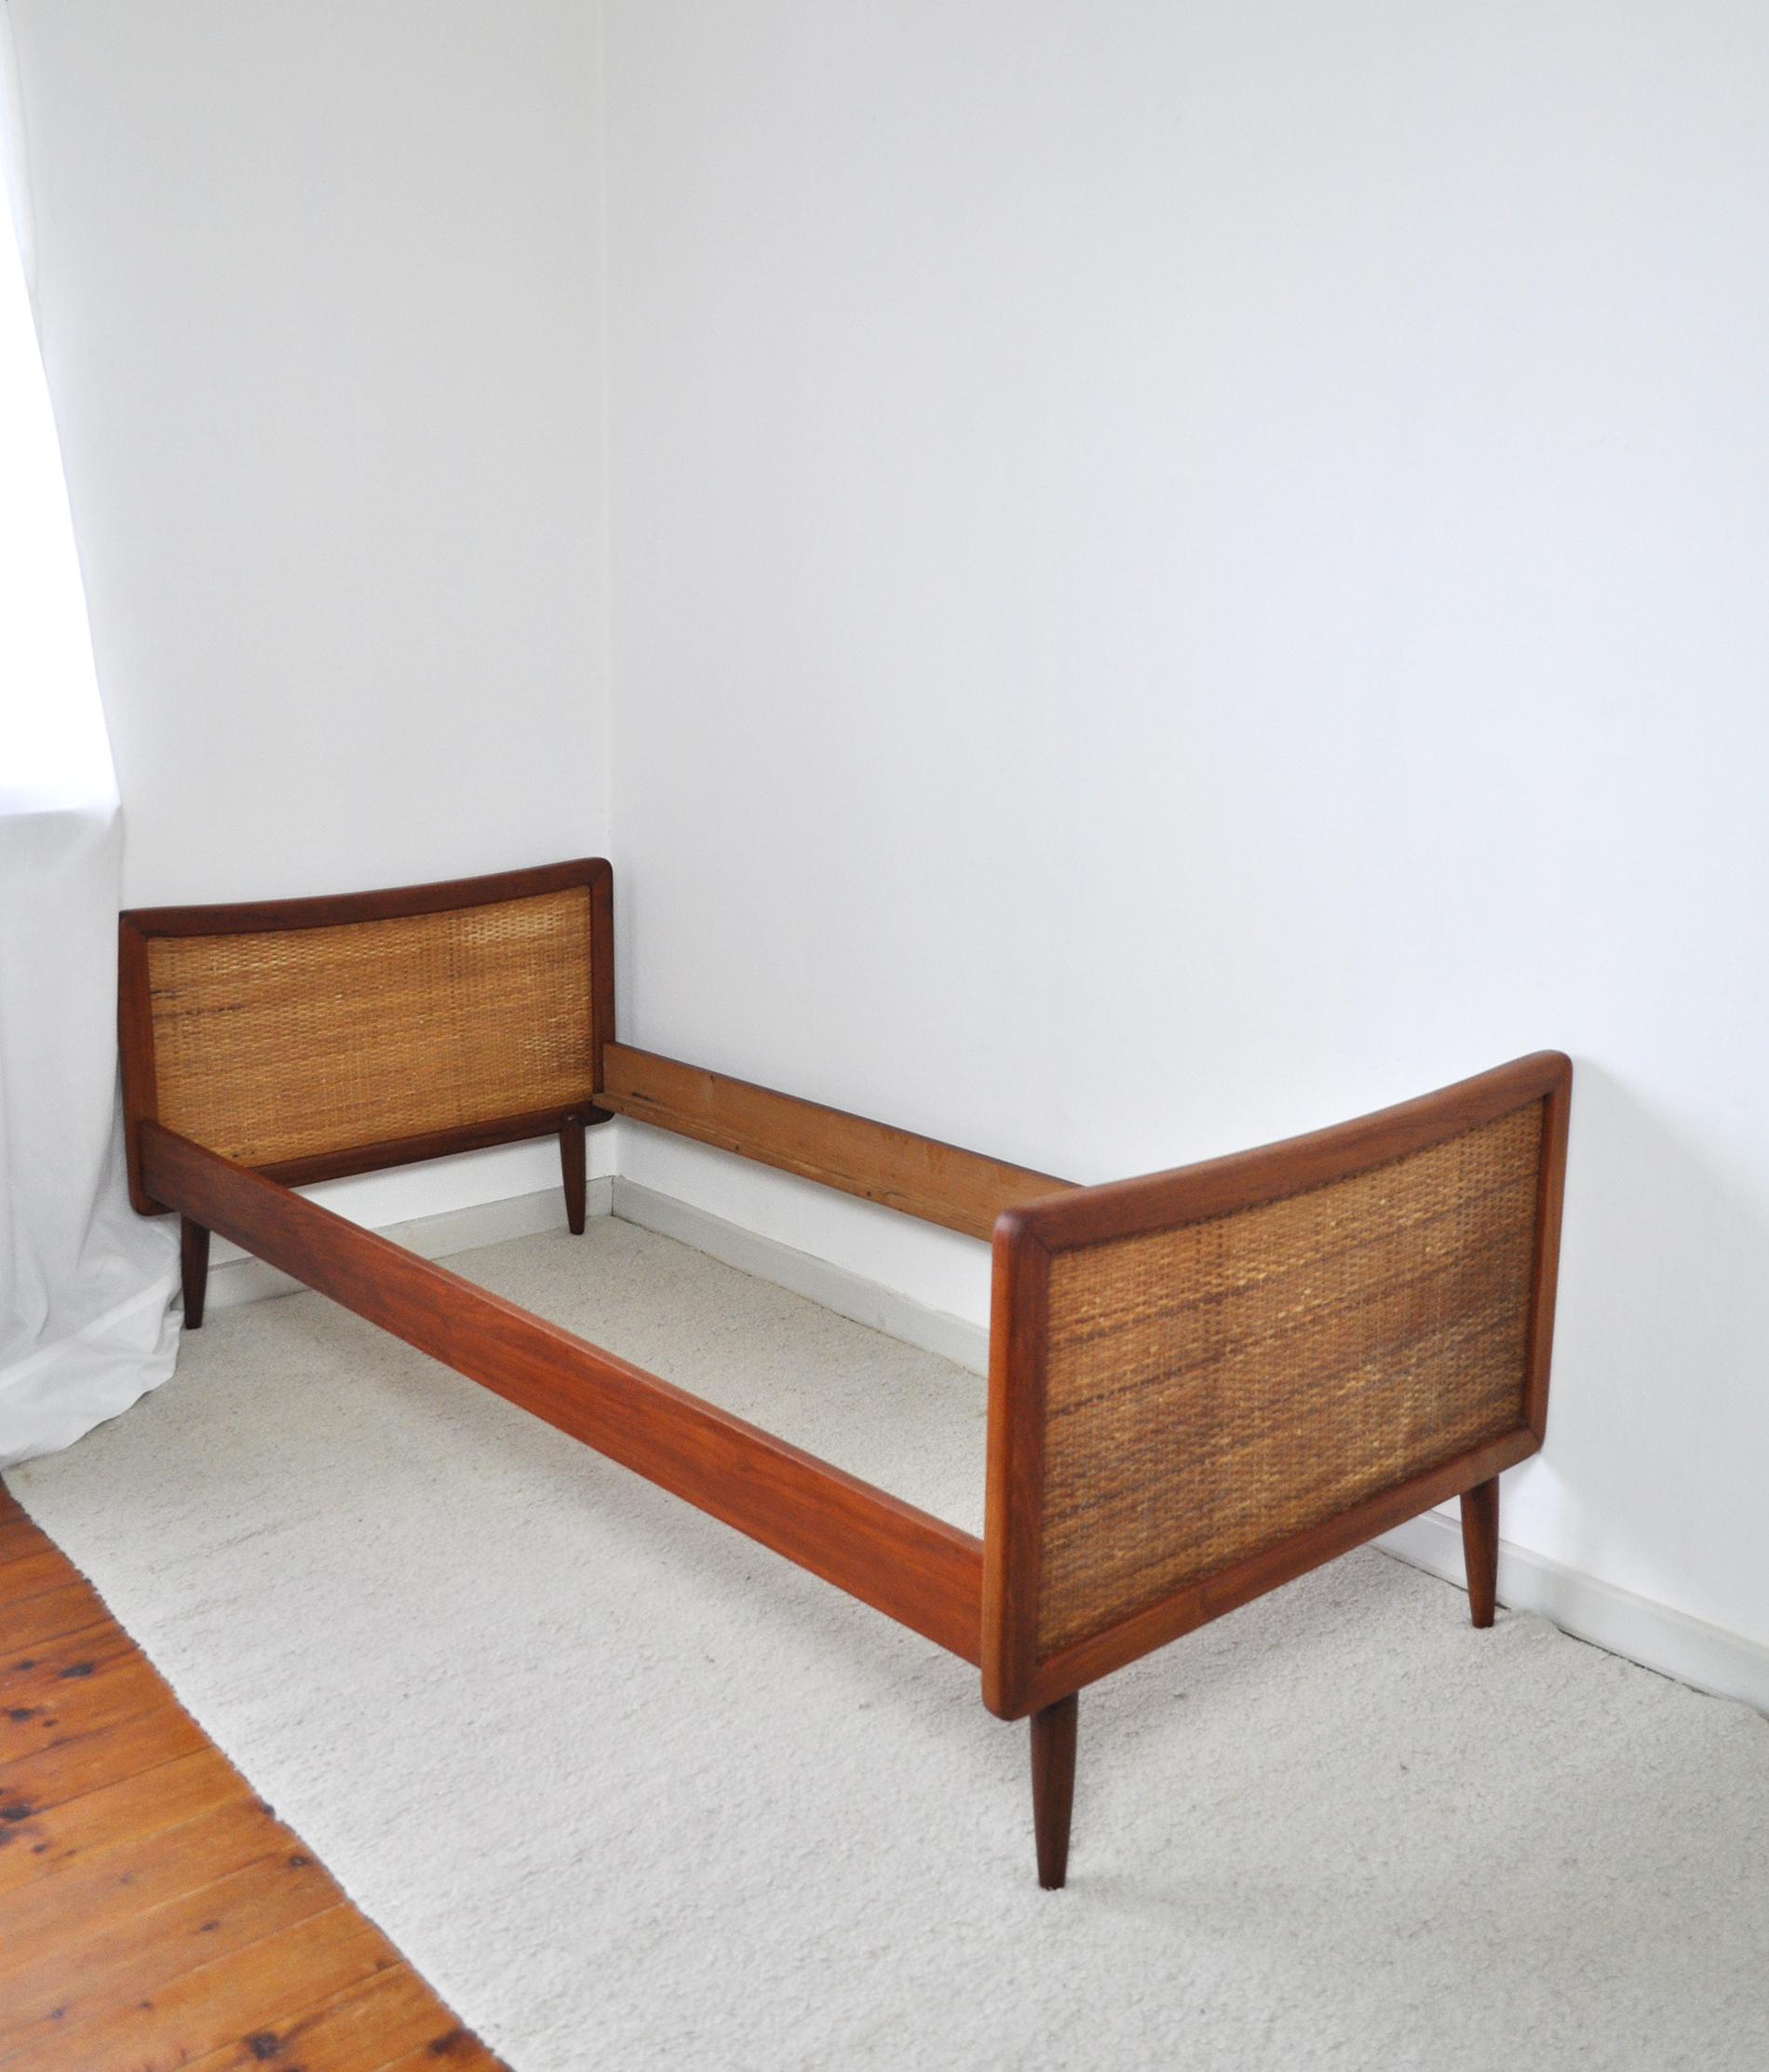 Beautiful curved midcentury teak bed with woven cane head and footboard.
Fine craftsmanship by Horsnæs, Denmark.
Signs of wear consistent with age and use.

Madras size: 190 x 85 cm.